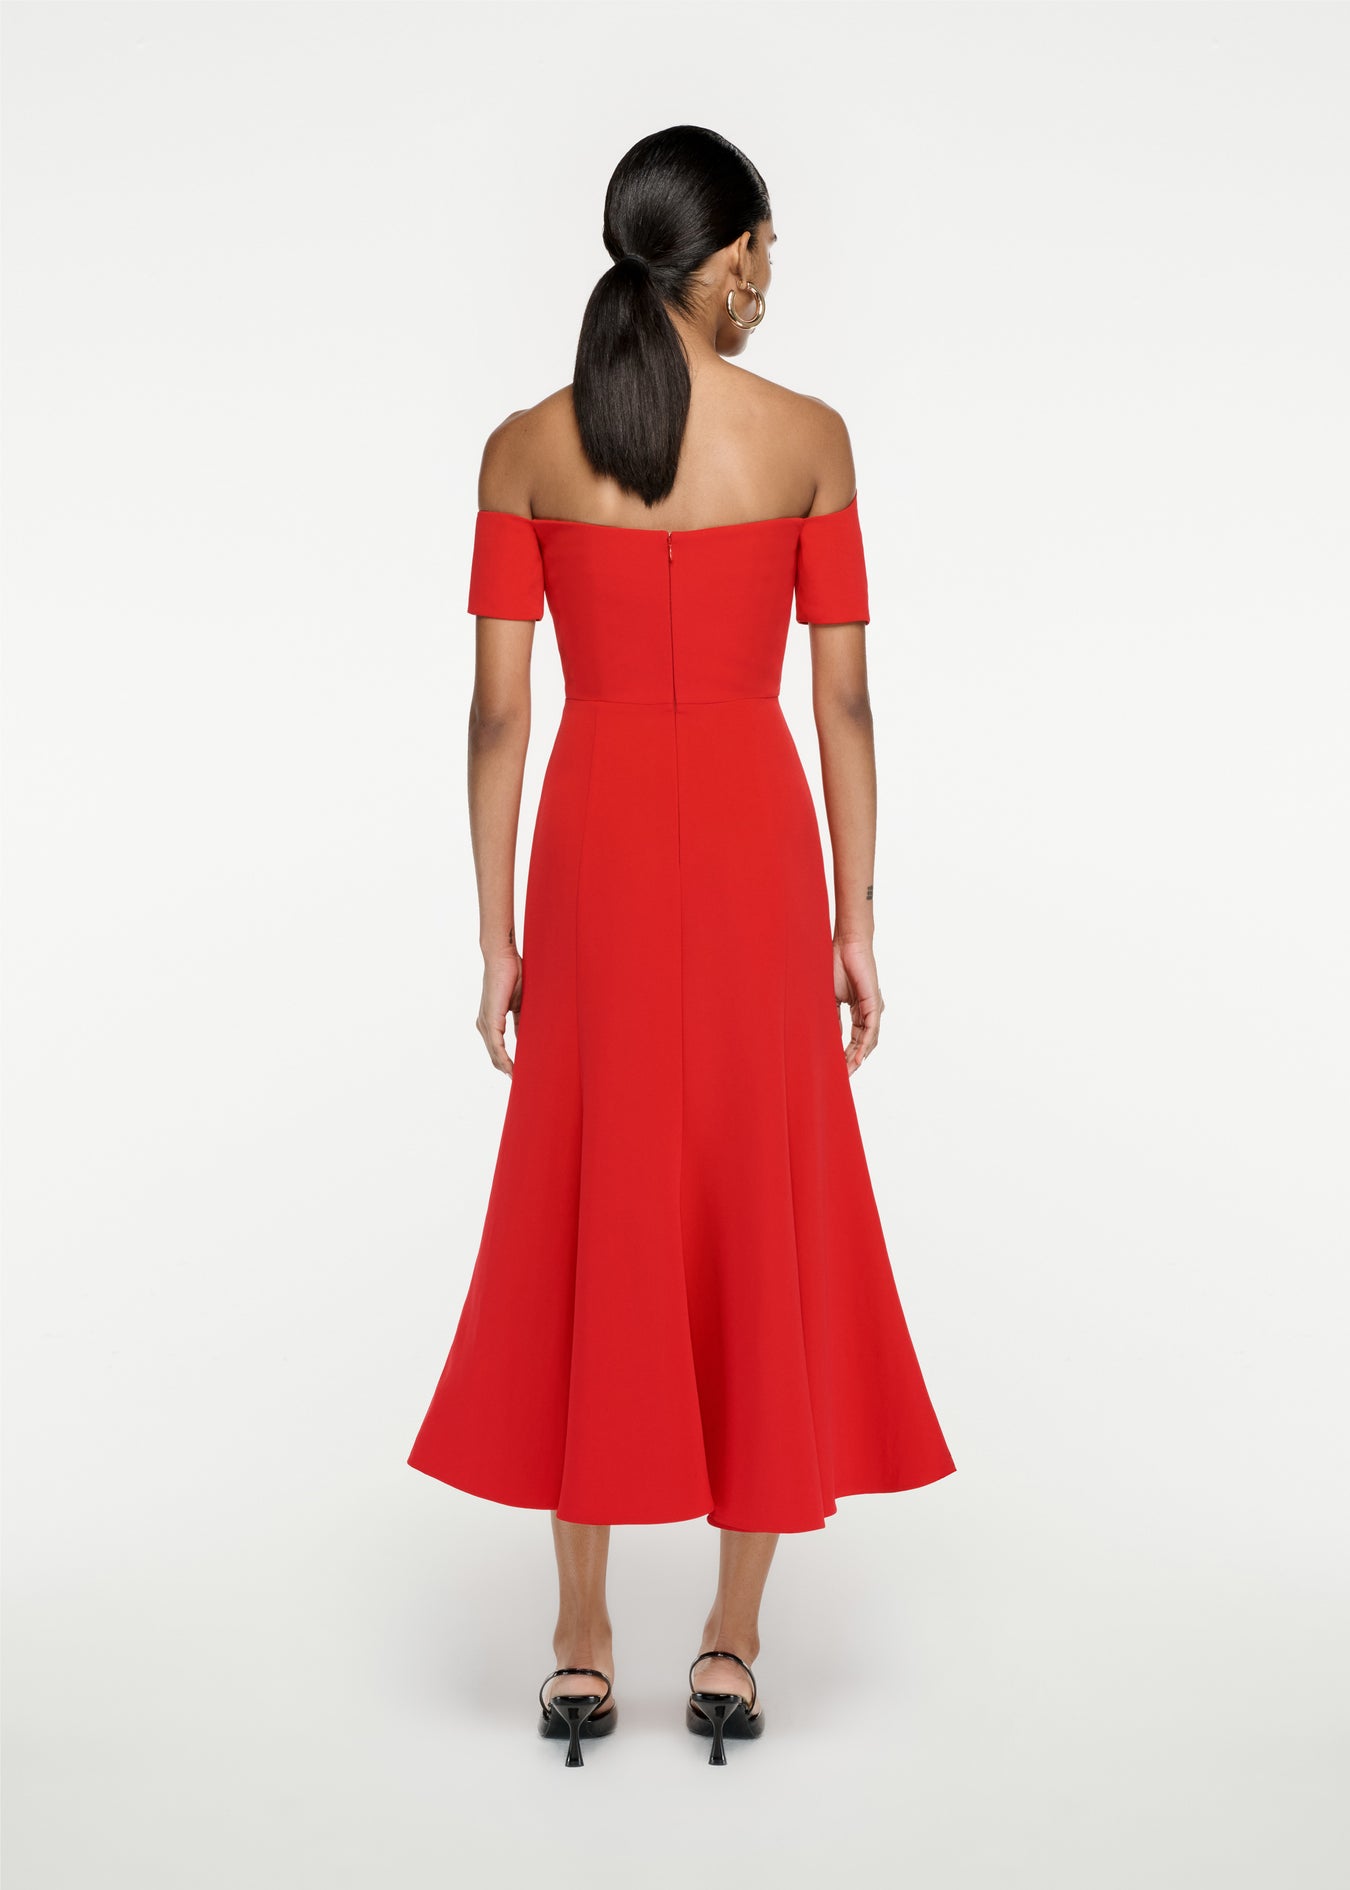 The back of a woman wearing the Asymmetric Stretch Cady Midi Dress in Red